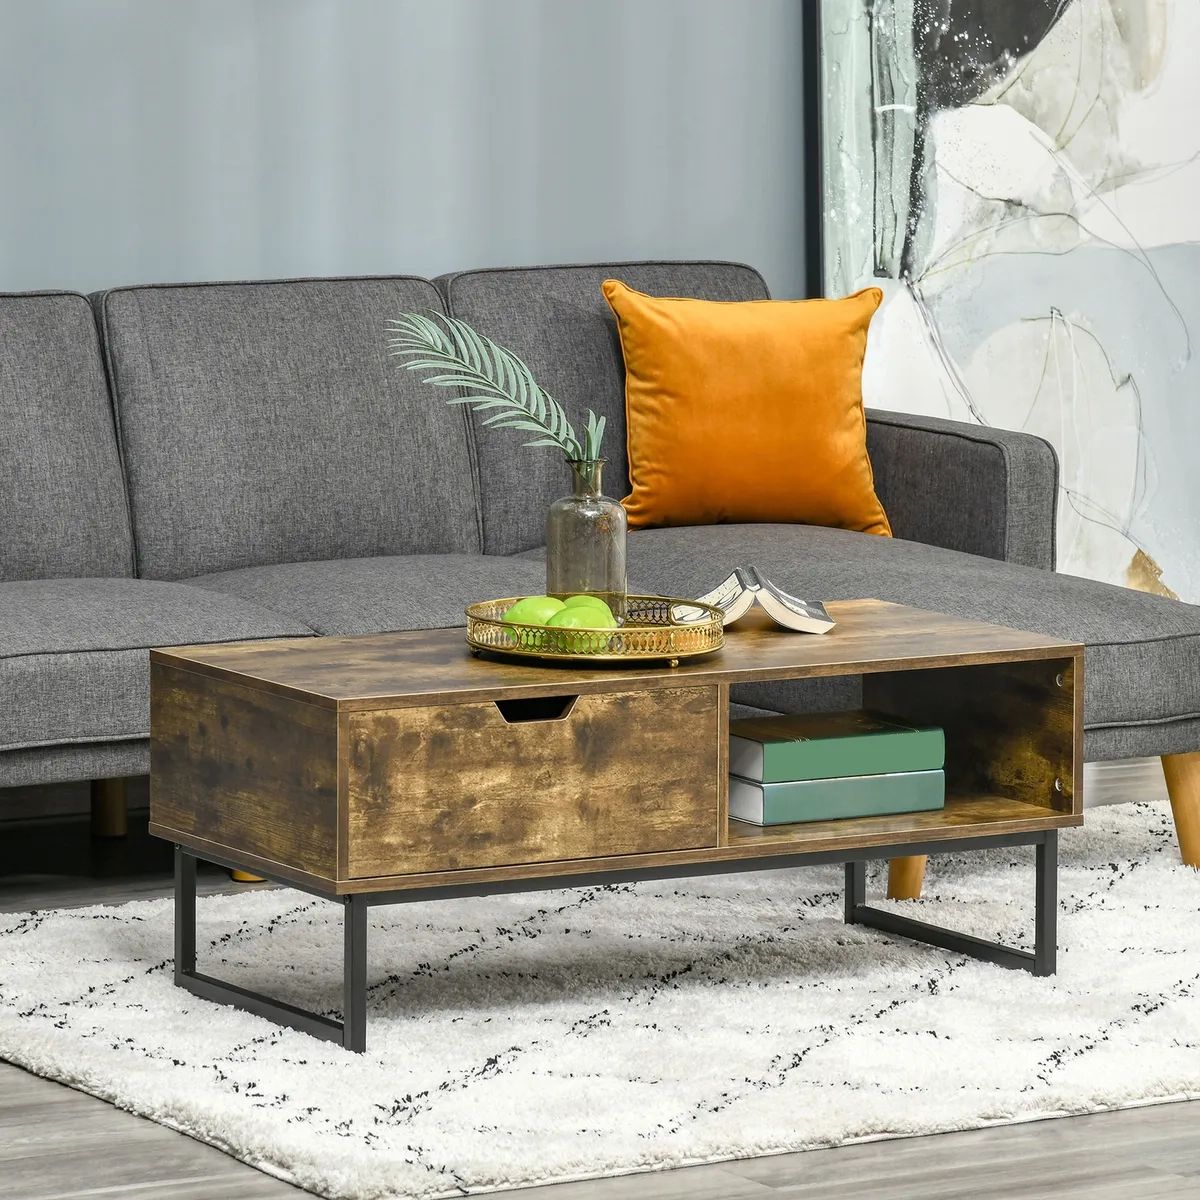 Industrial Coffee Table With Shortage Shelf & Drawer End Table Metal Frame  Brown | Ebay Pertaining To Metal 1 Shelf Coffee Tables (View 5 of 15)